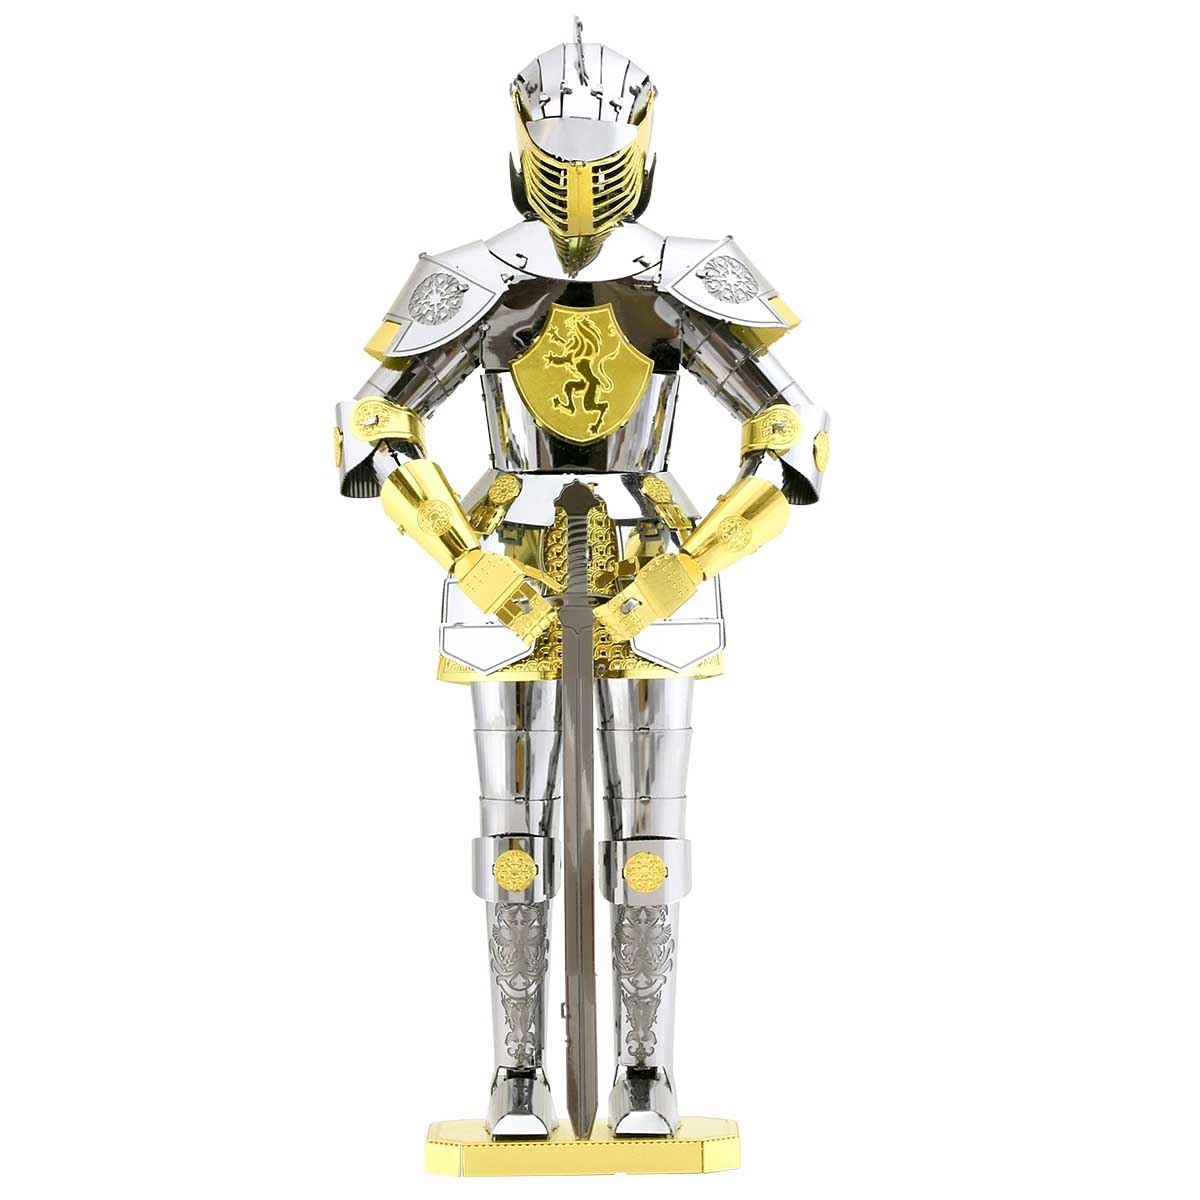 European Knight Armor Military 3D Puzzle